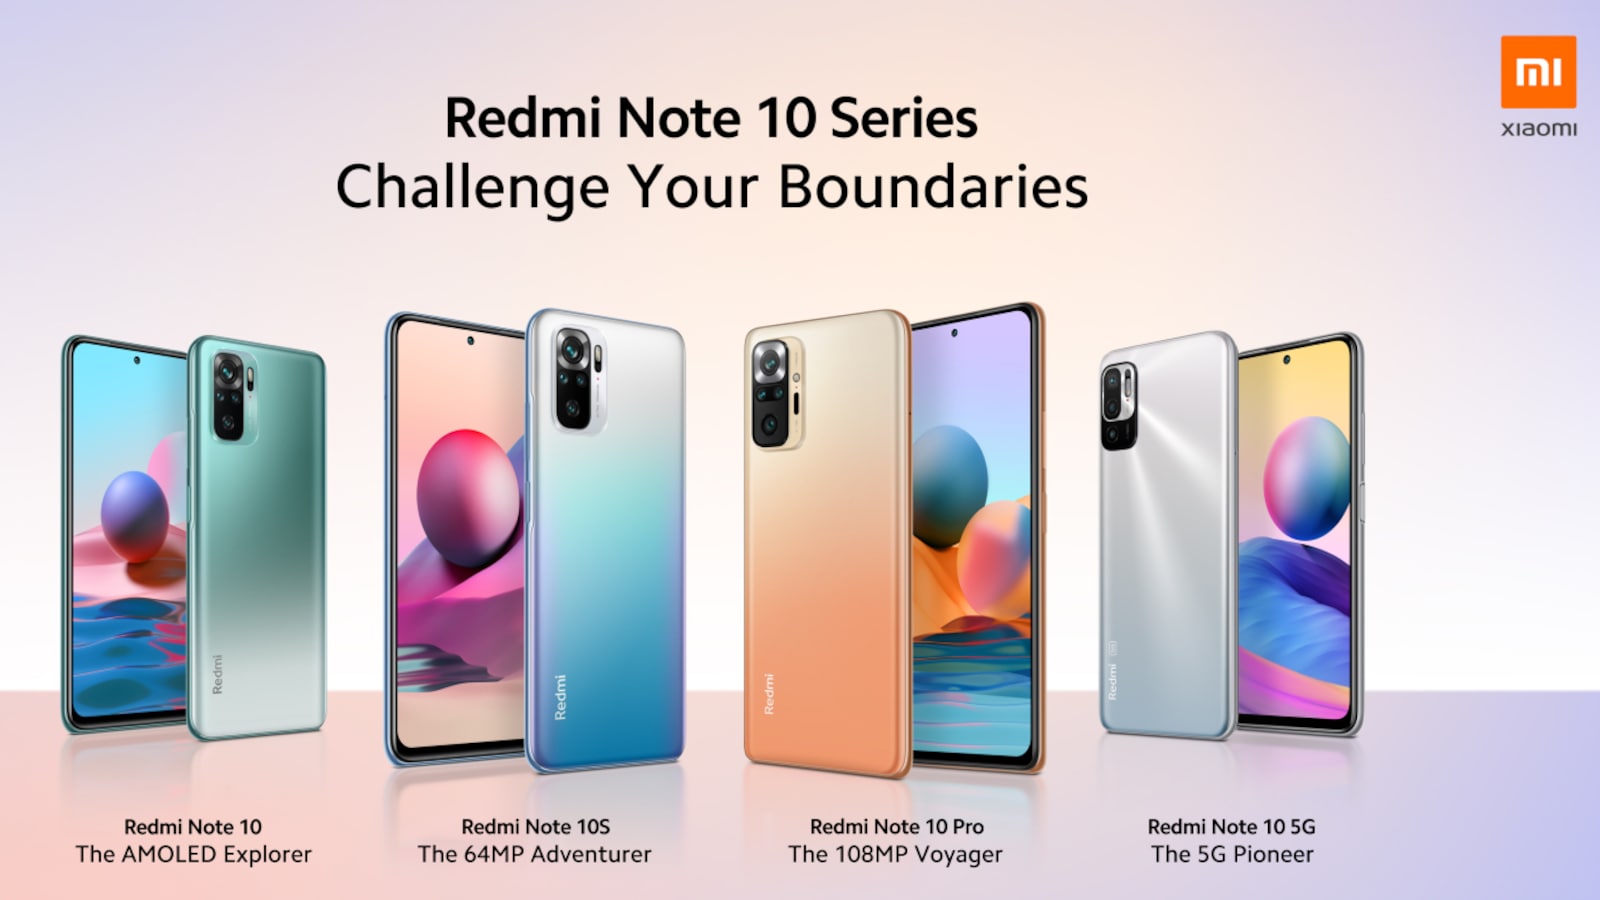 Redmi Note 10 Pro 5G with Dimensity 1100, 5000mAh battery launched